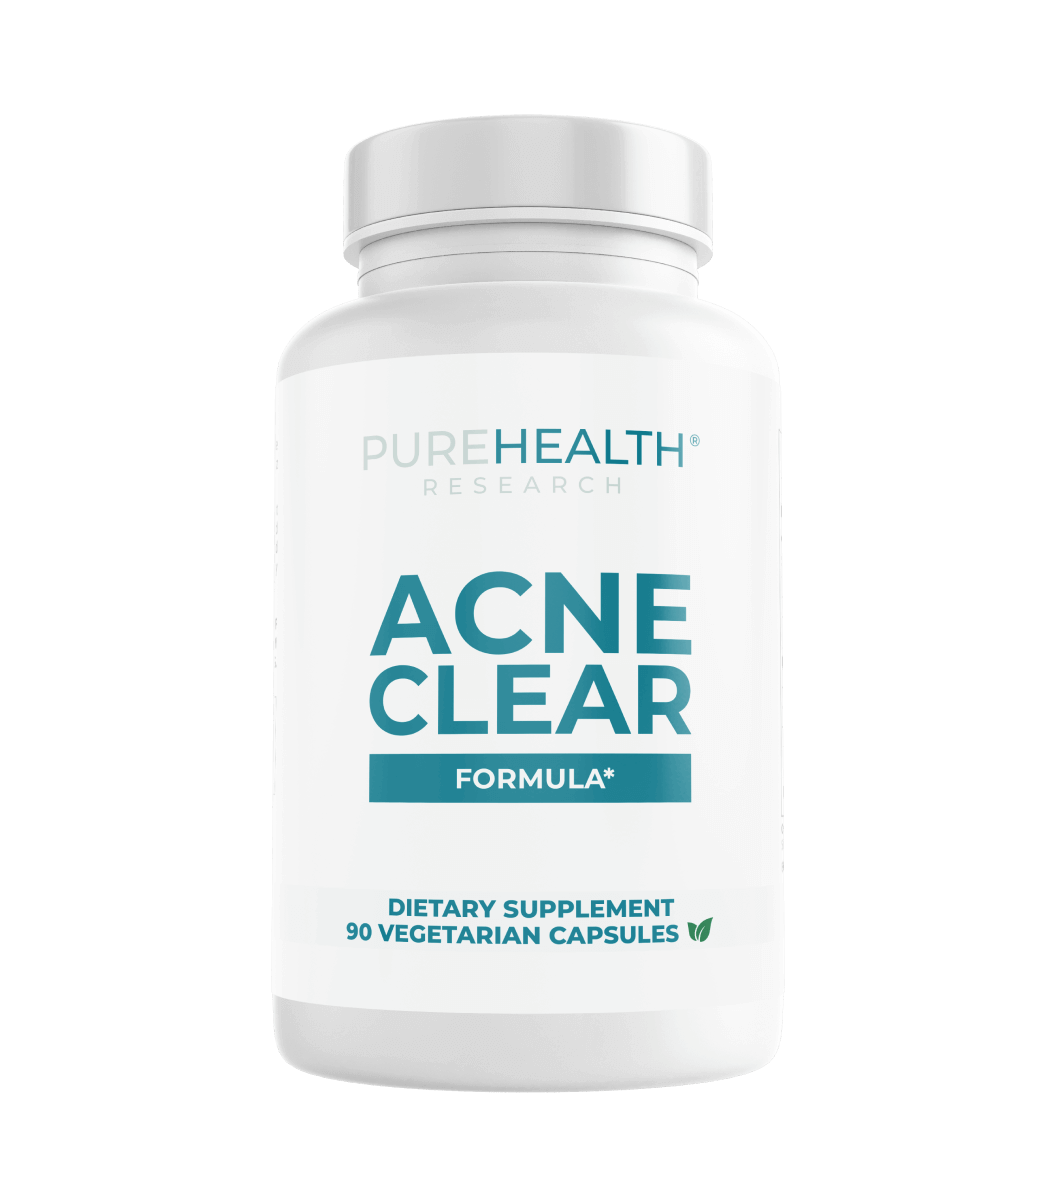 Acne Clear Formula Supplement Bottle by Purehealth Research